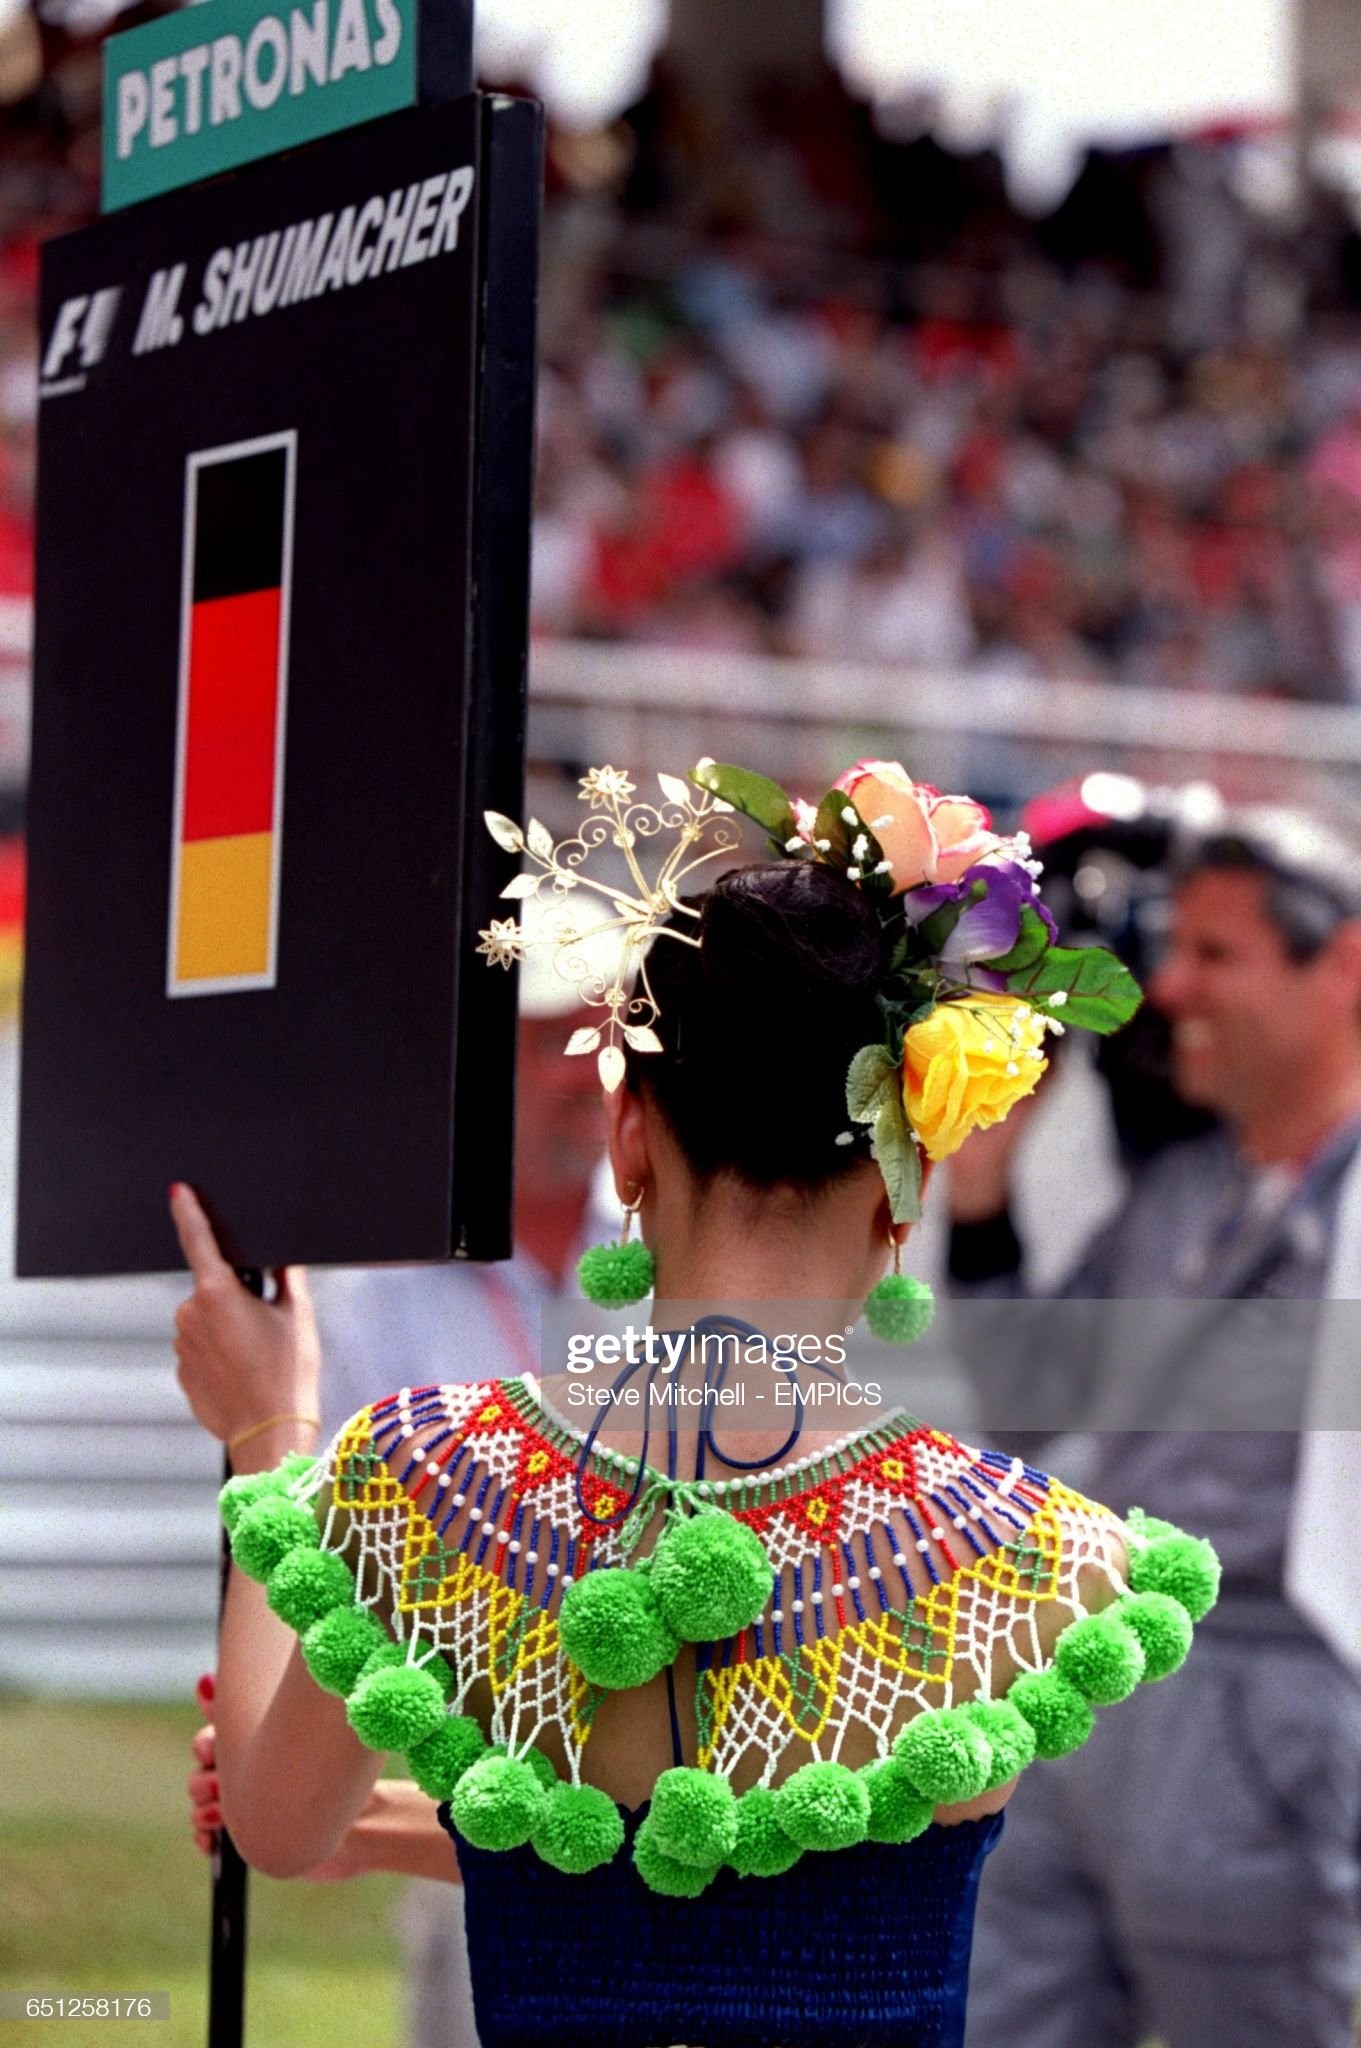 Michael Schumacher's grid girl takes her place at the Malaysian Grand Prix on March 18, 2001. 